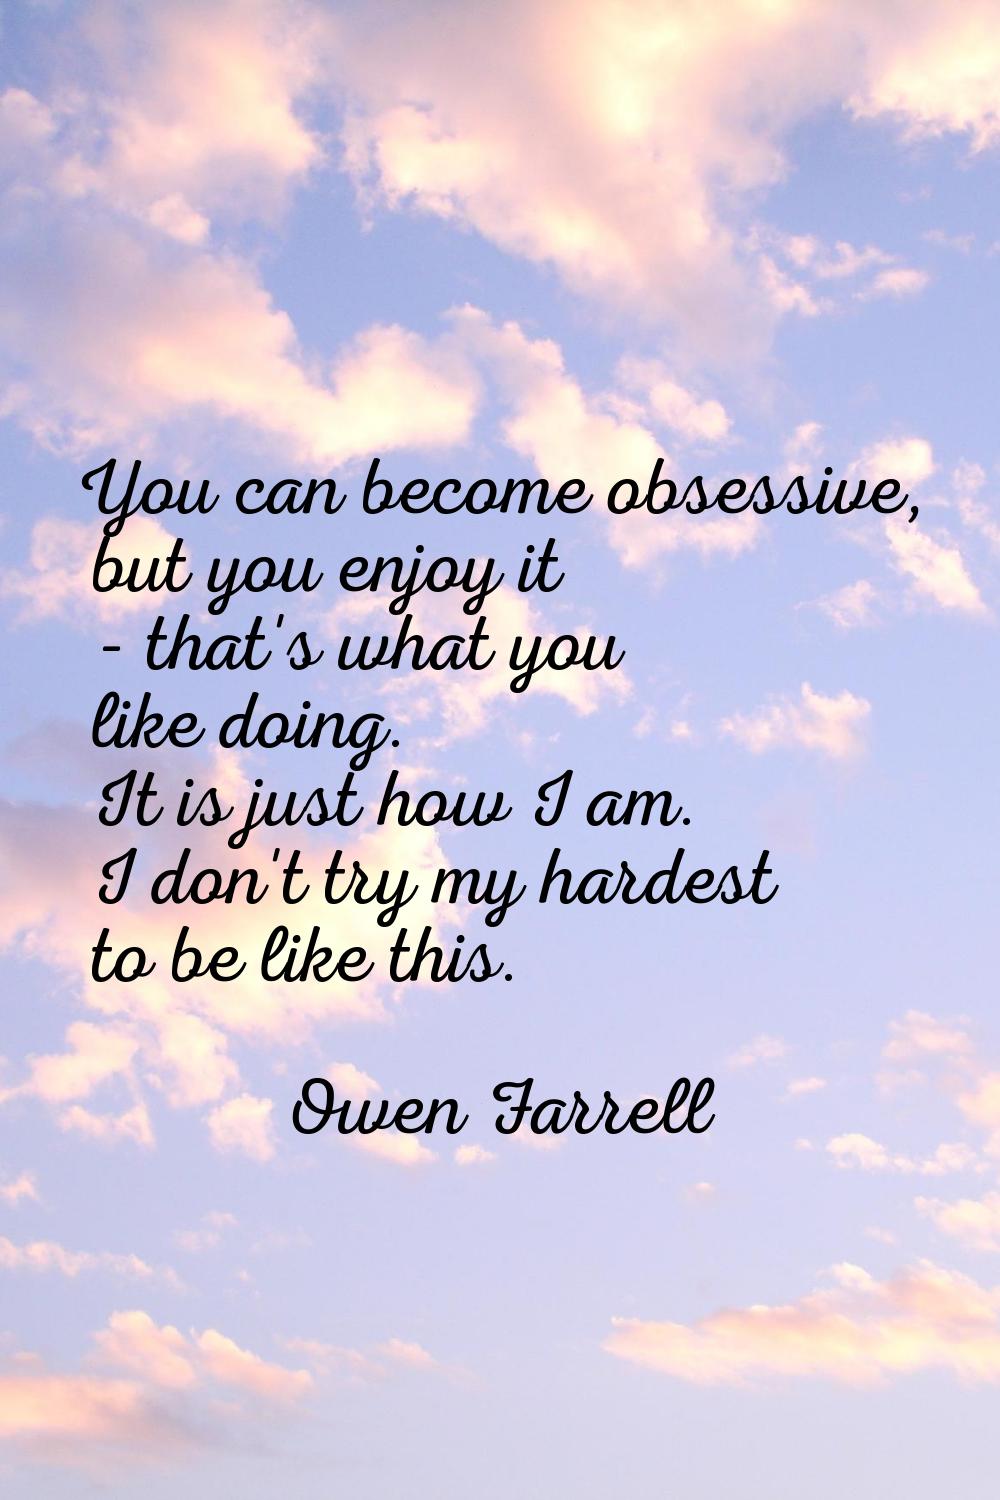 You can become obsessive, but you enjoy it - that's what you like doing. It is just how I am. I don